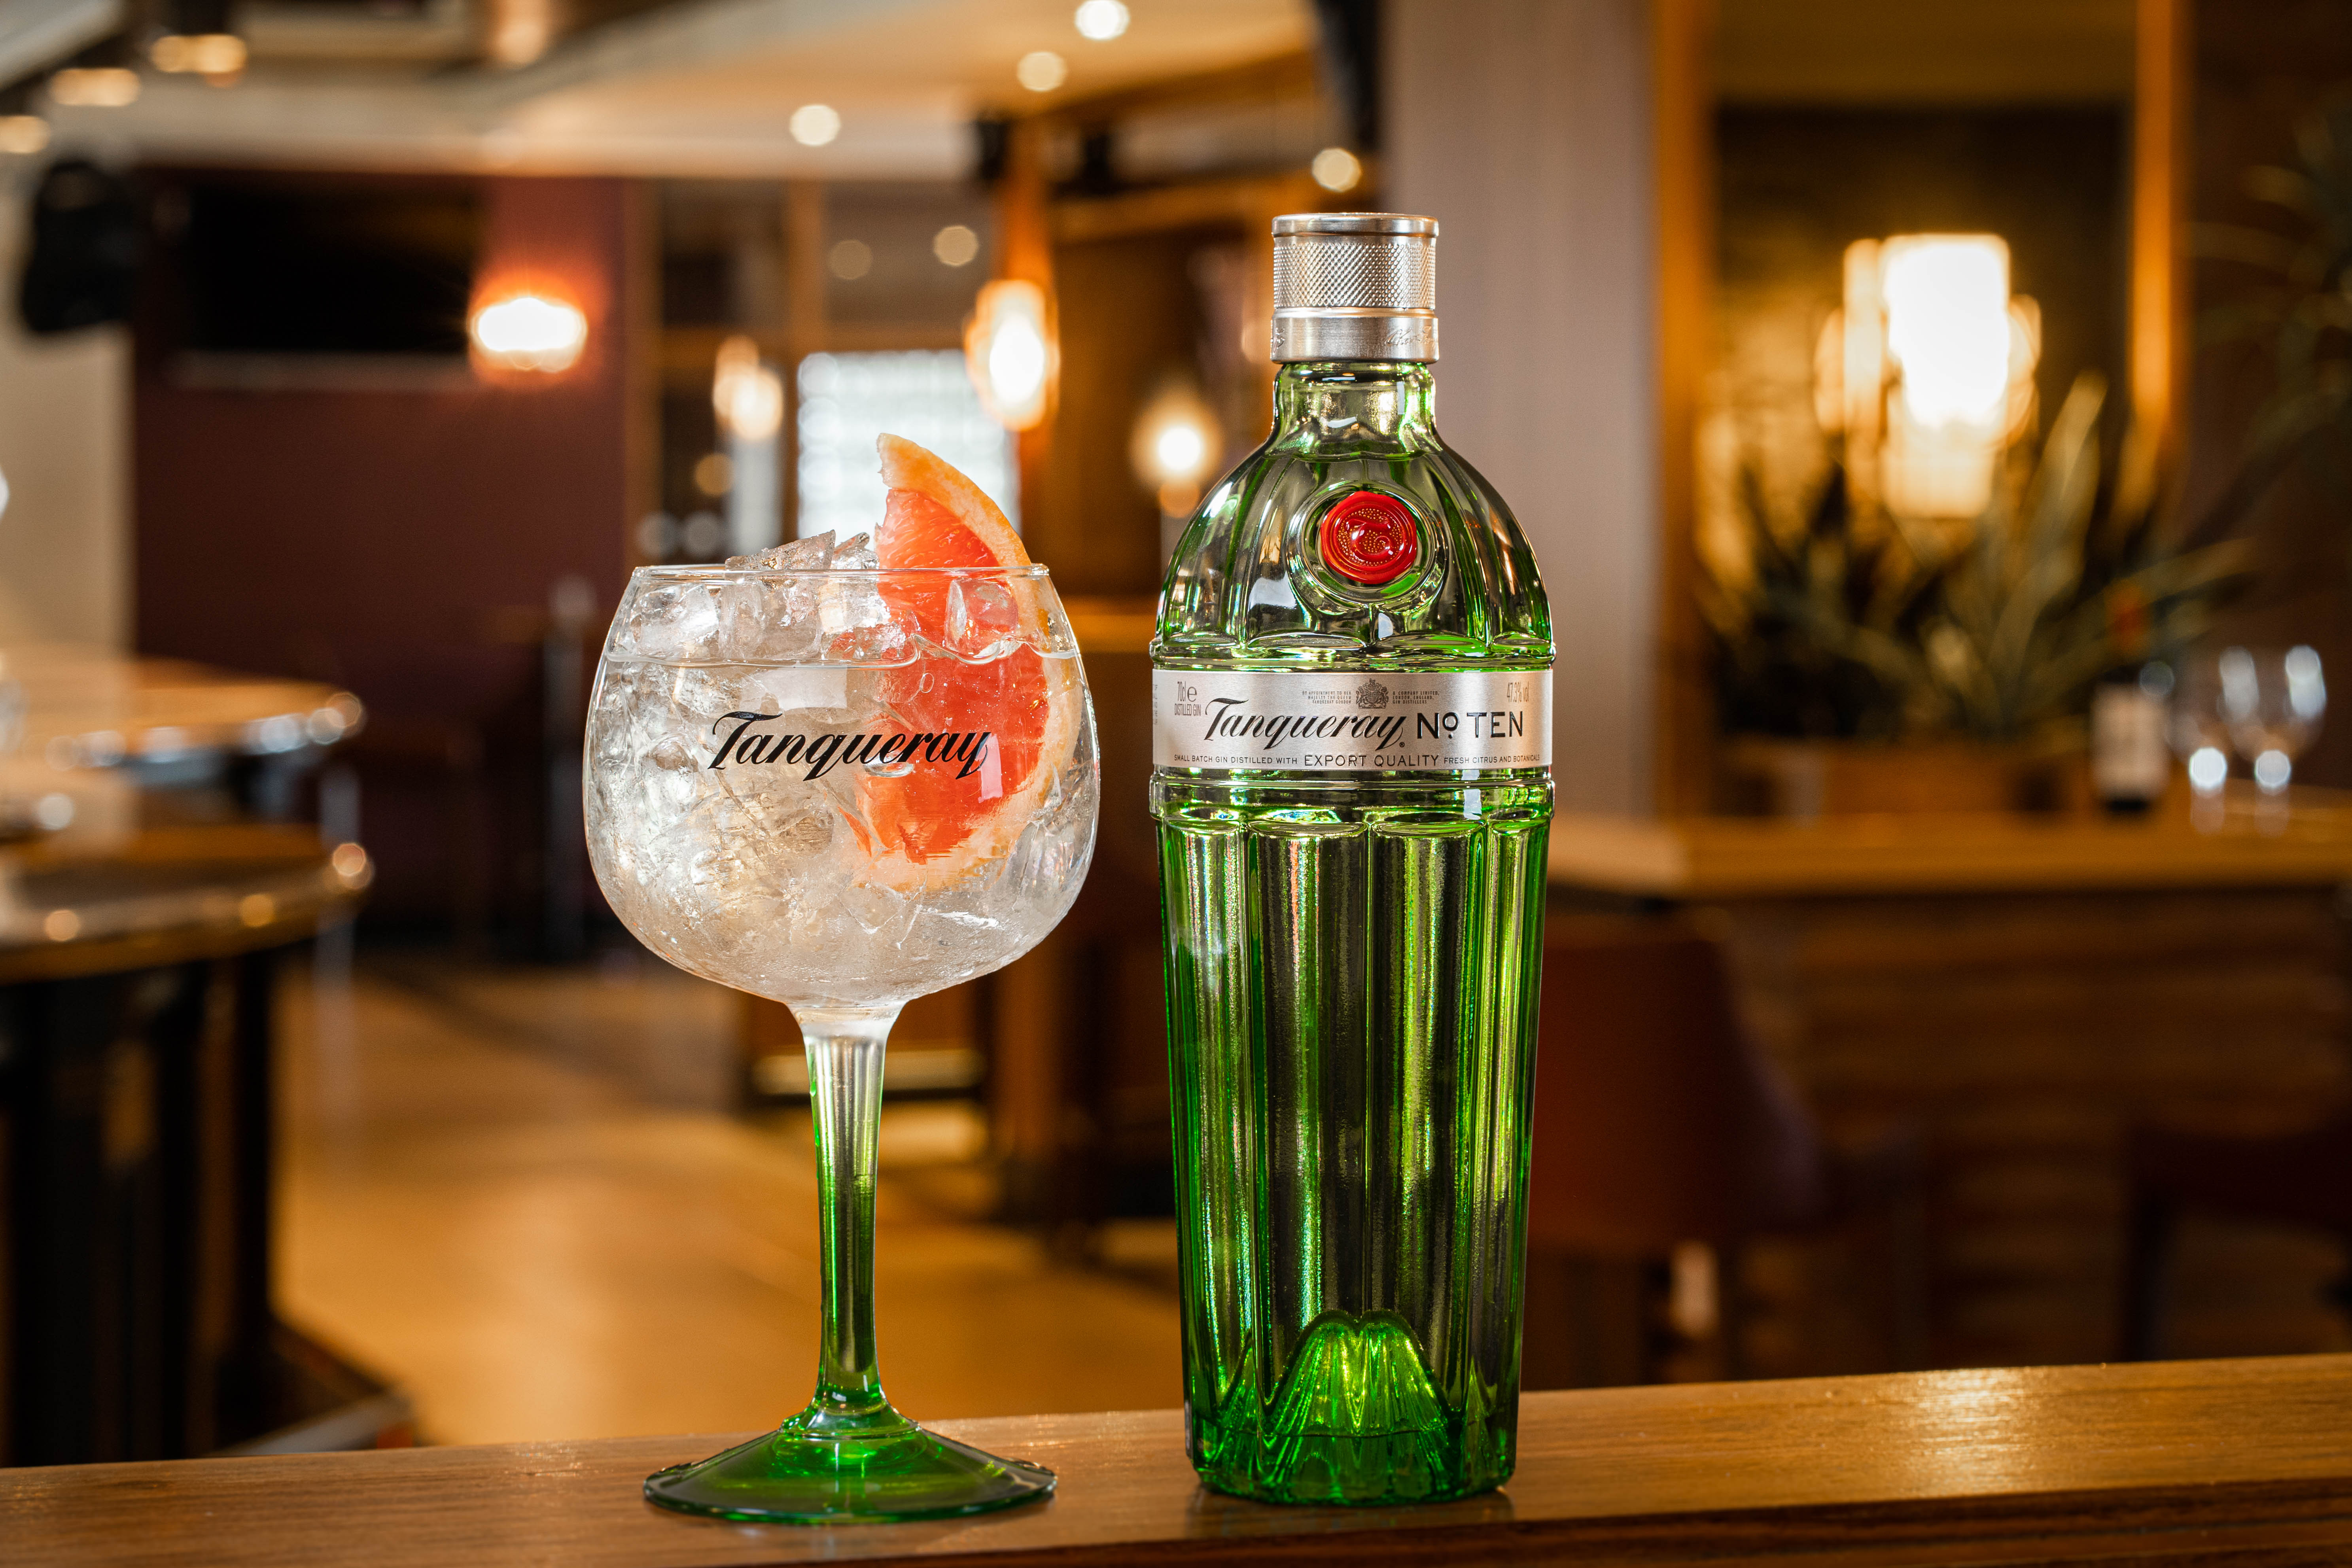 LeWinters with a taste of Tanqueray